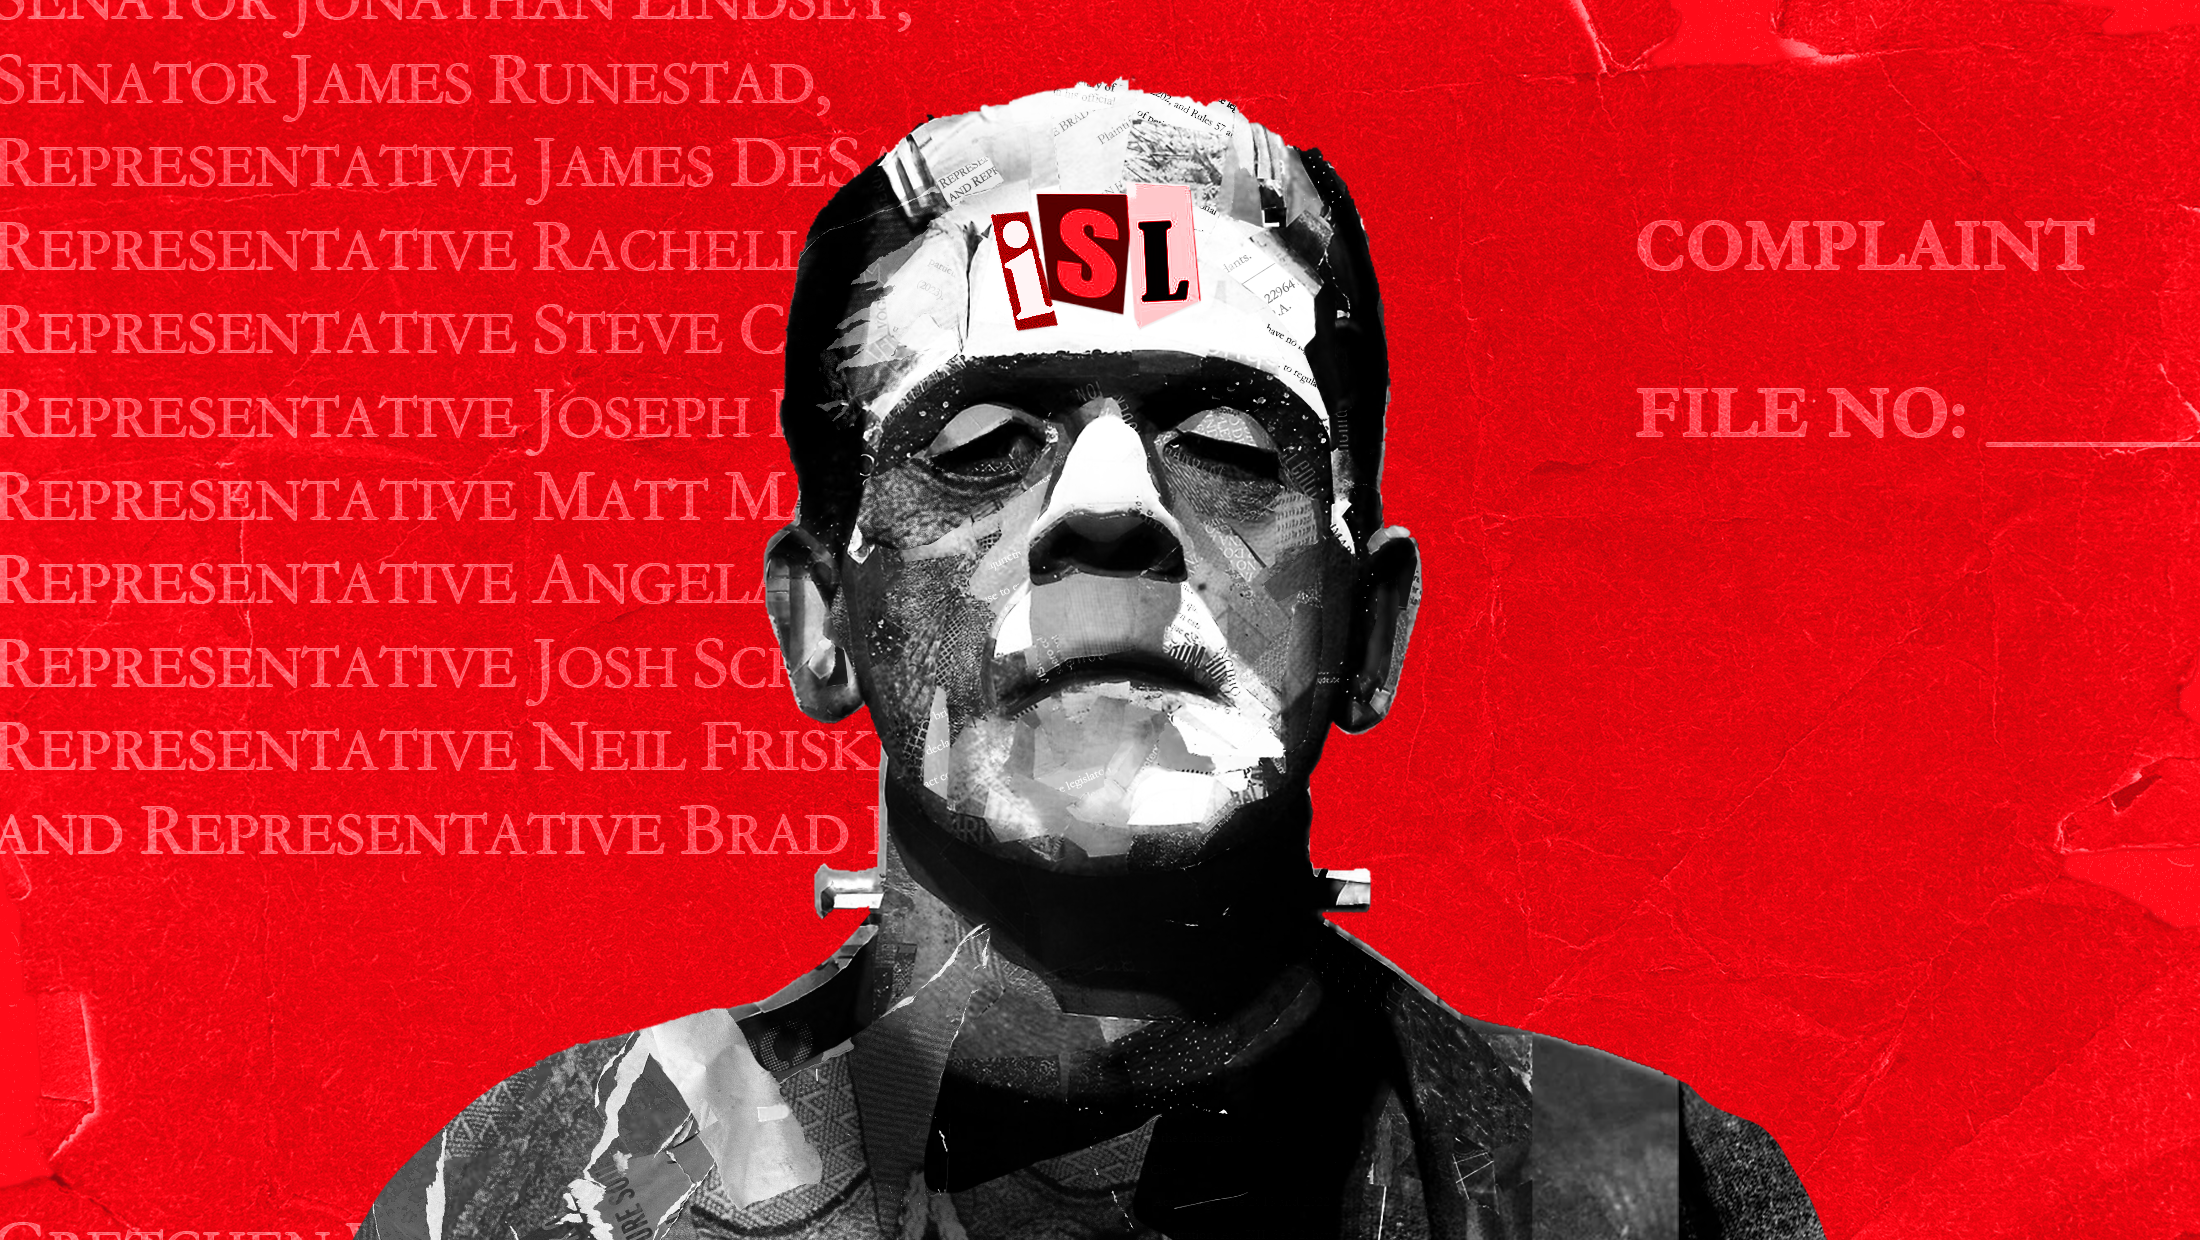 Red background with black and white toned image of Frankenstein's monster with "ISL" printed on his forehead and the complaint from a recent lawsuit in Michigan folded into the background.